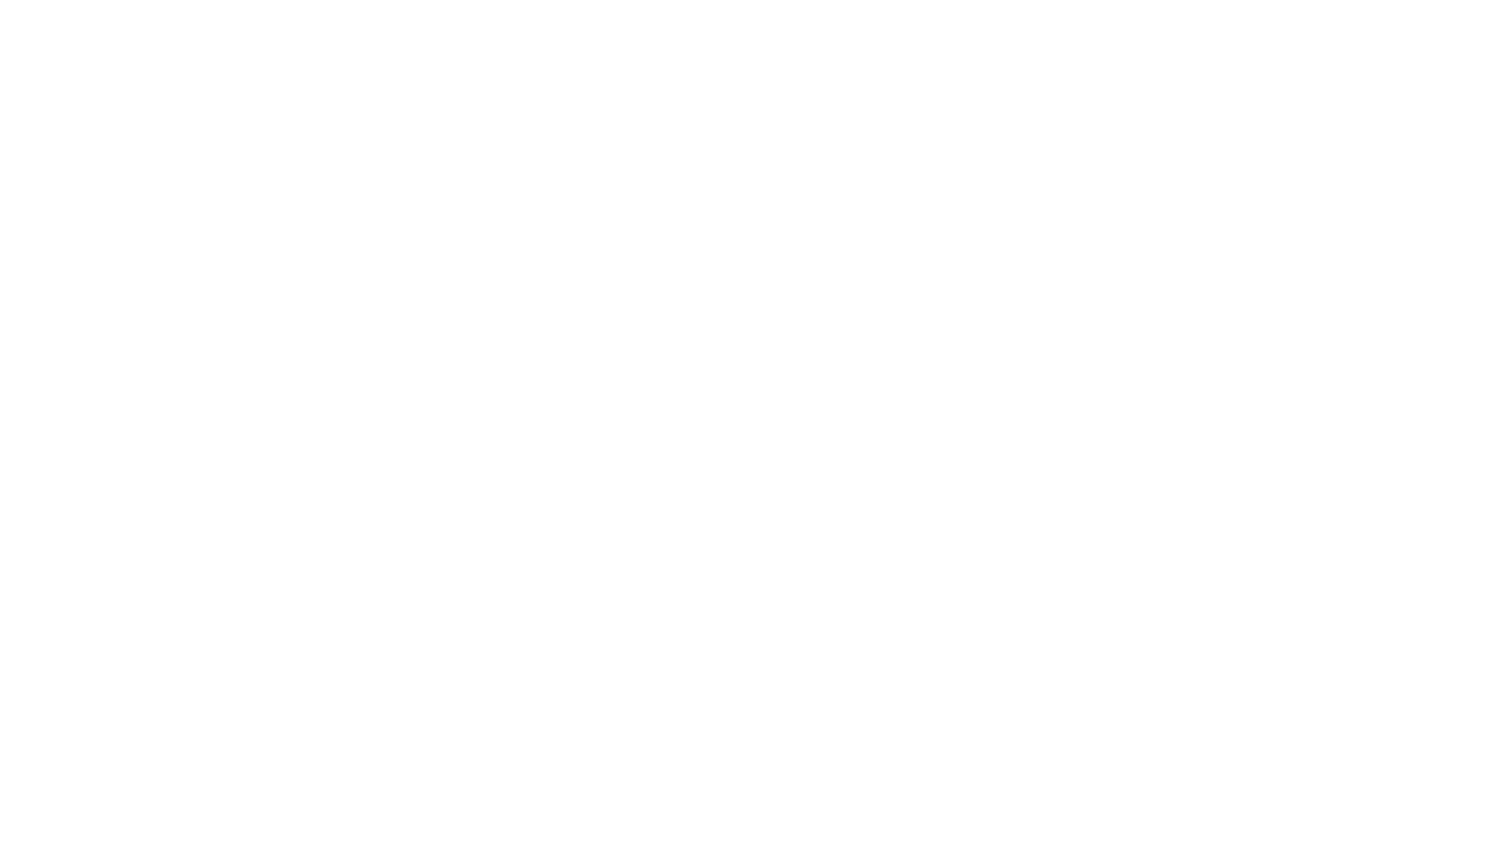 CHURCH OF THE NEW COVENANT